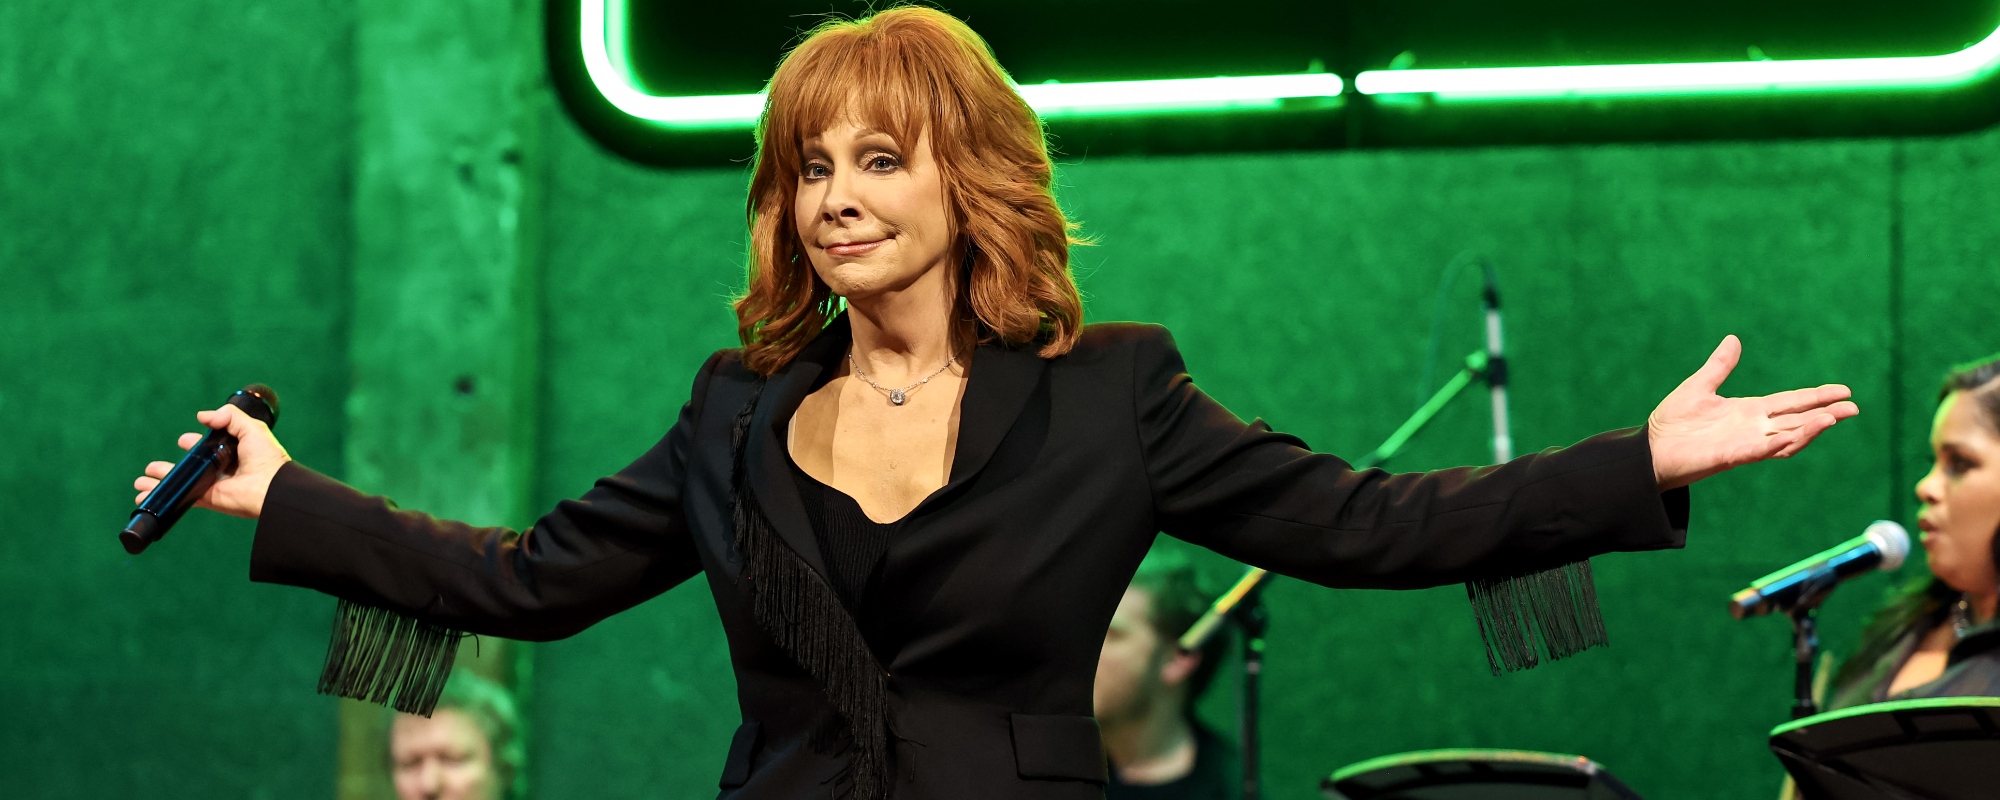 The Story Behind the Touching Tribute Reba McEntire Wrote for Her Late Father, “Daddy”